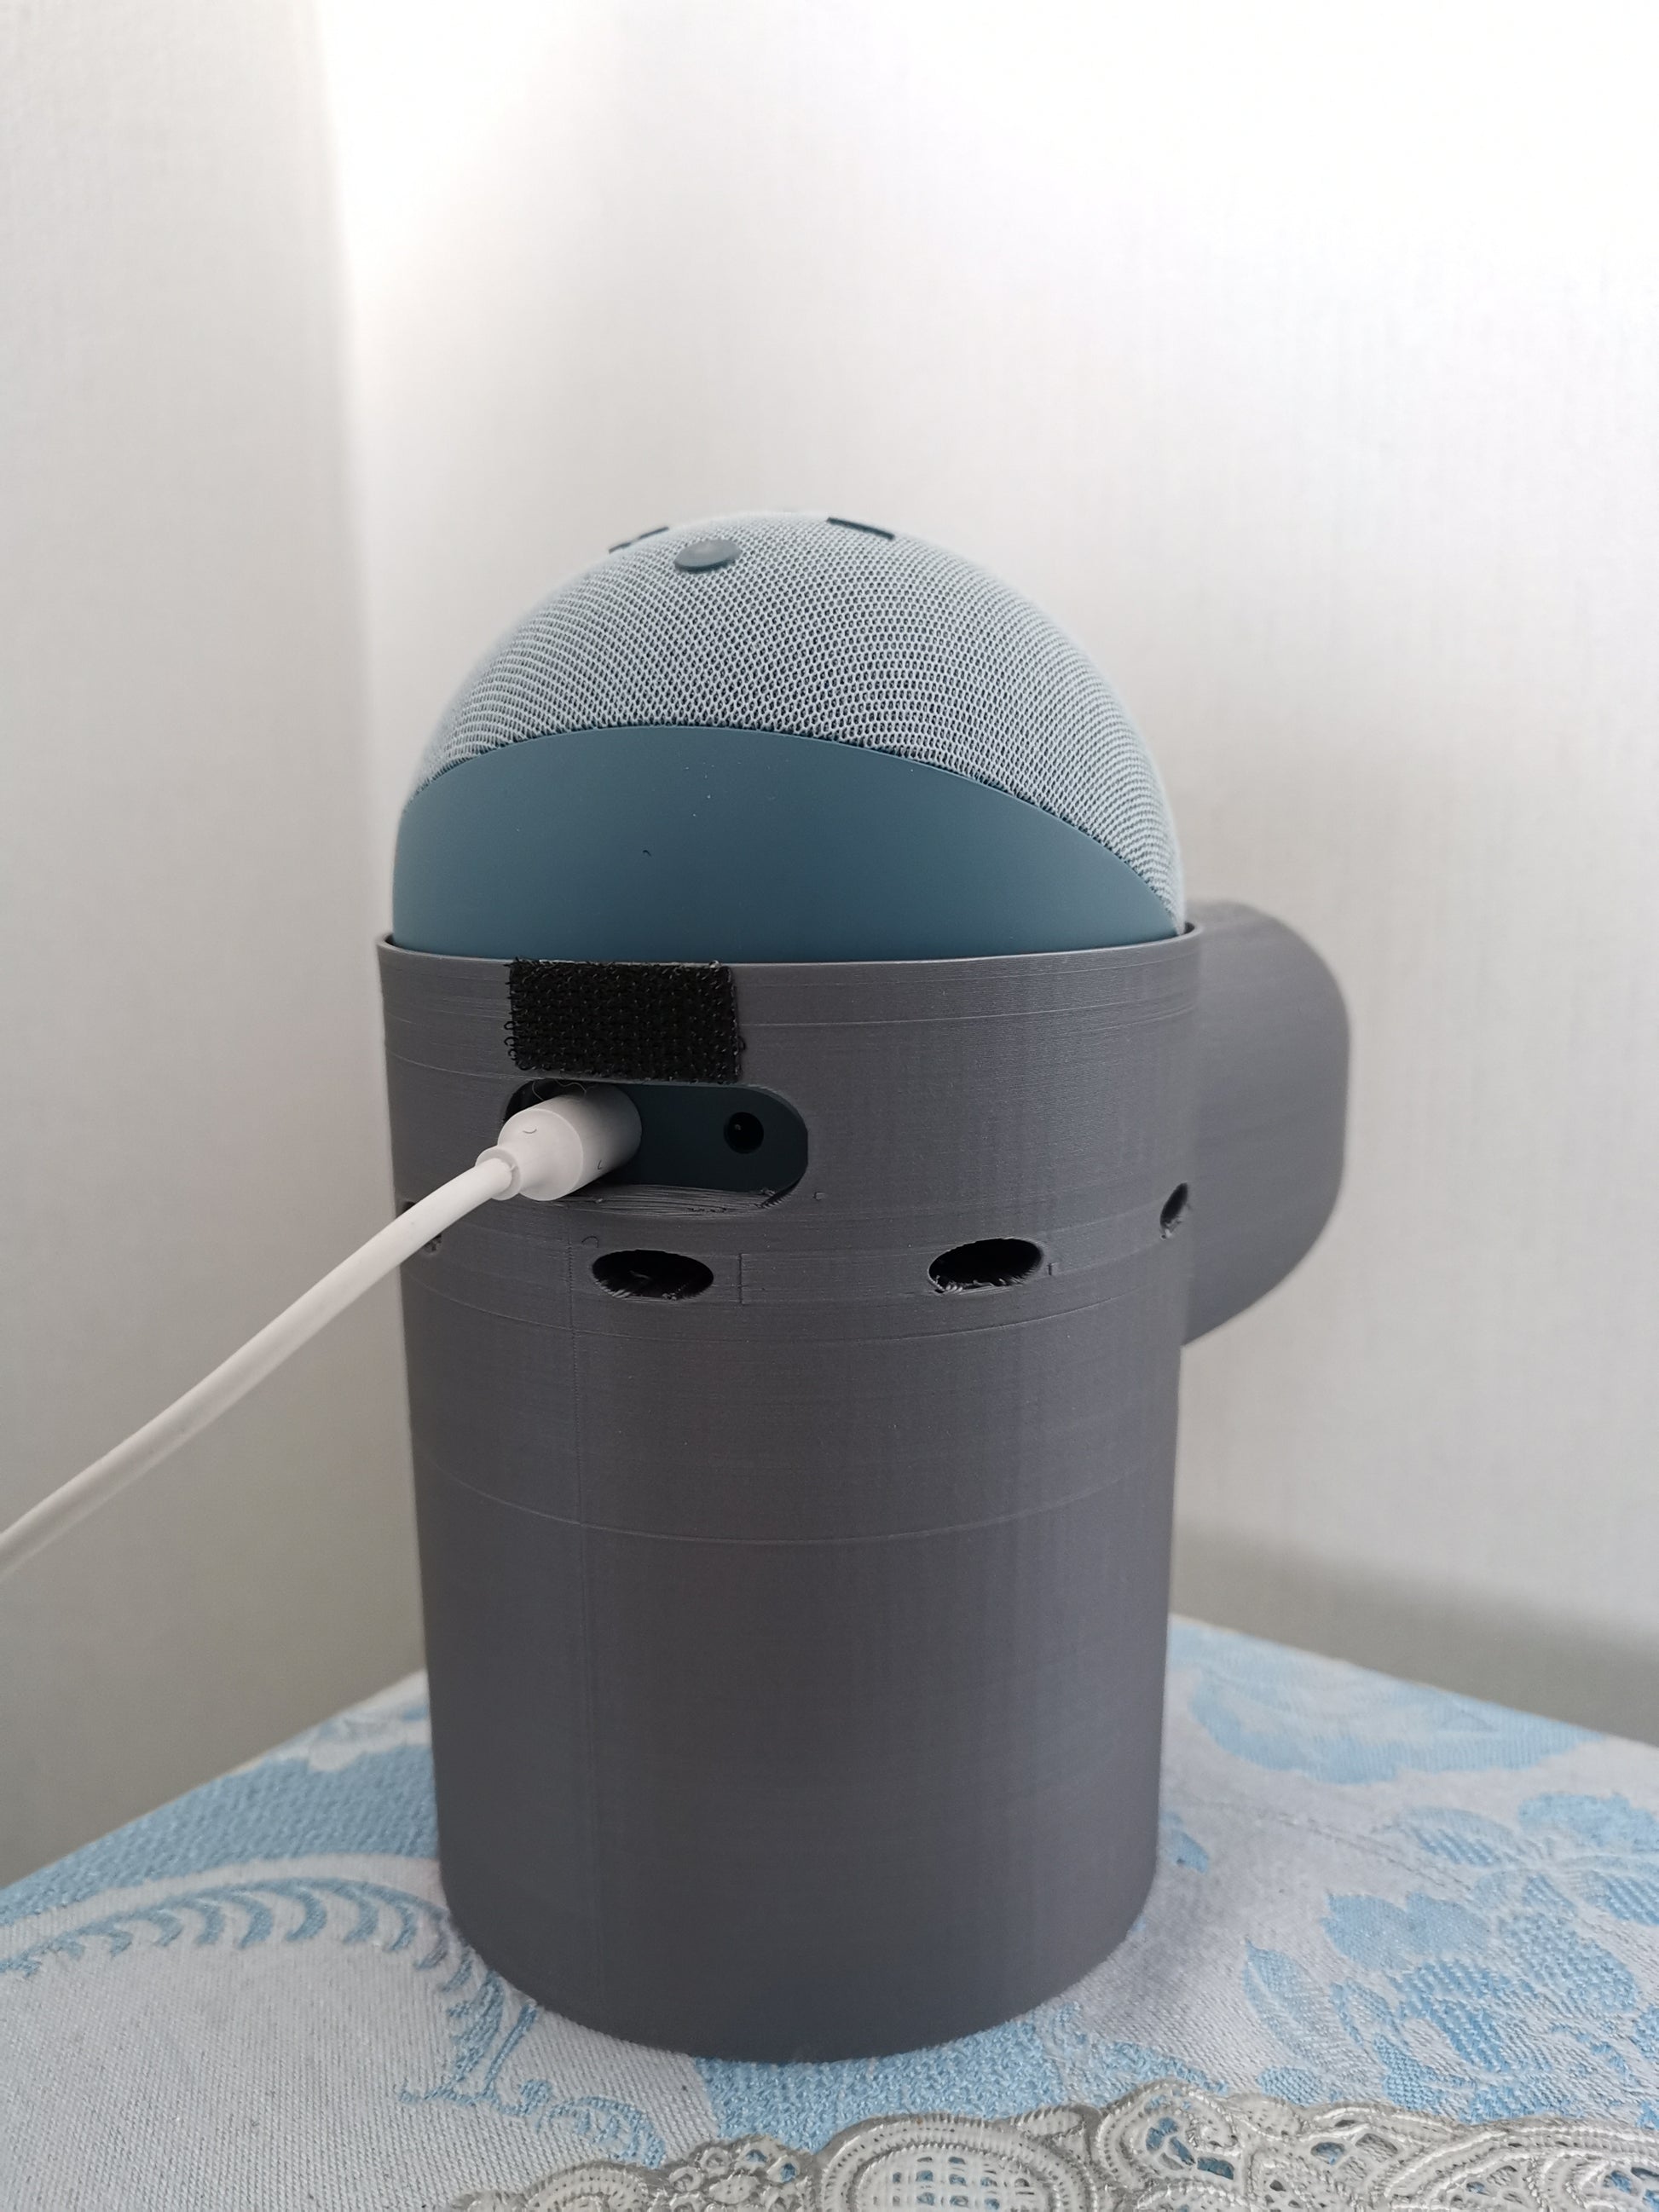 Bender Alexa Echo holder from the back in traditional colours